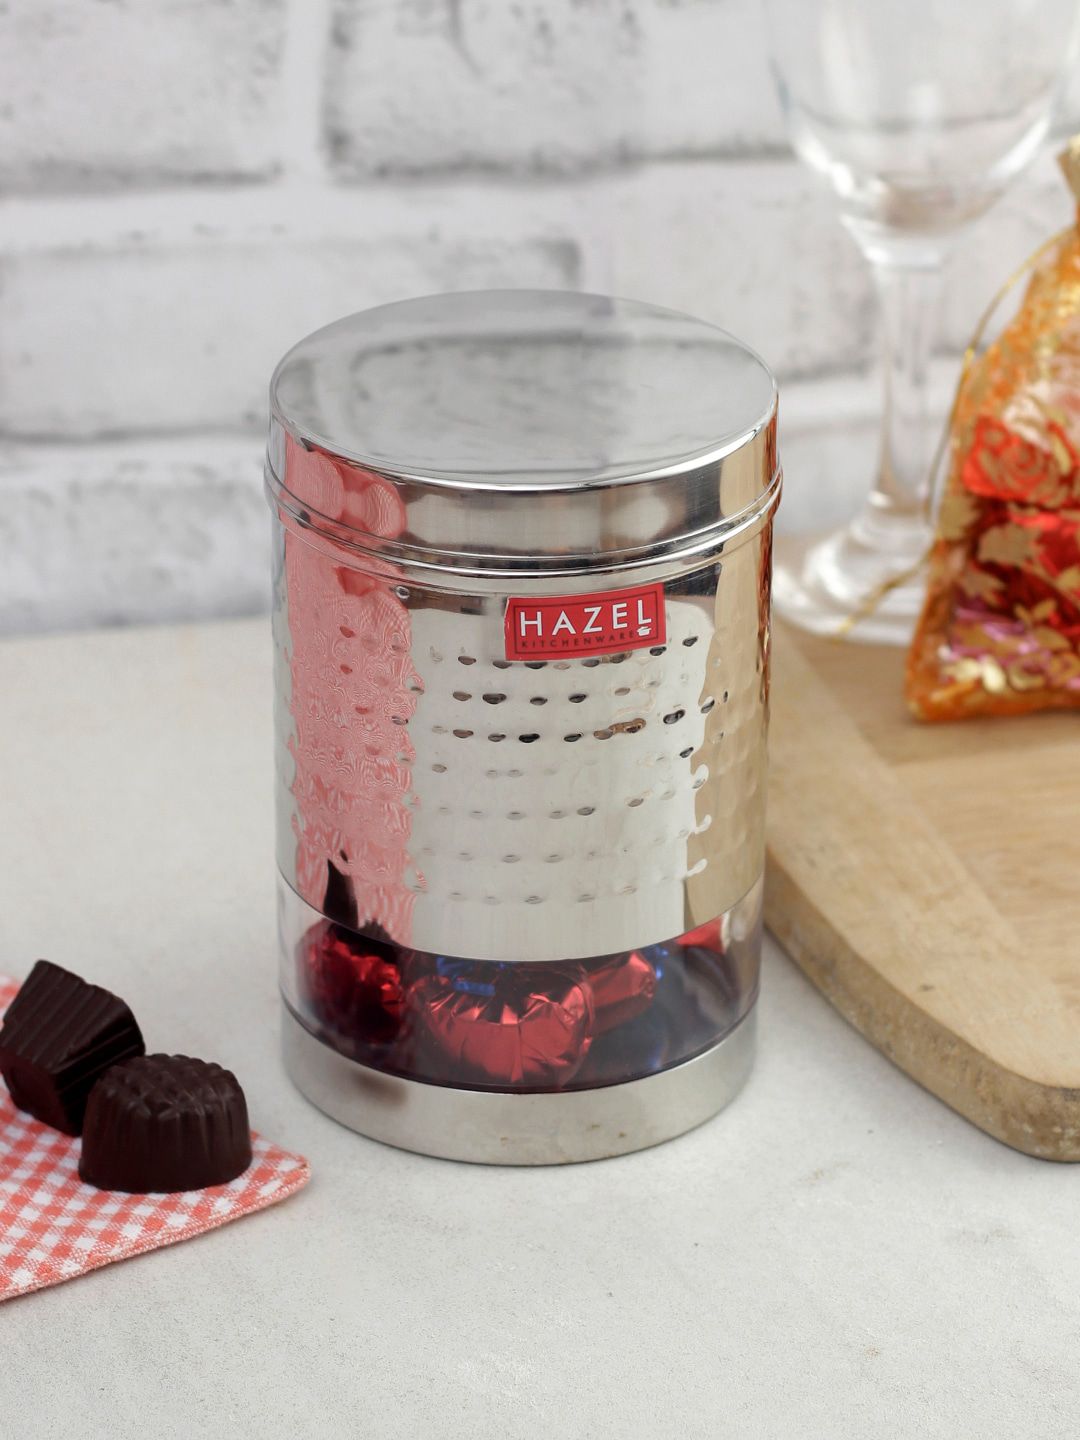 HAZEL Set Of 3 Silver-Toned & Transparent Stainless Steel Containers 950 ml Price in India